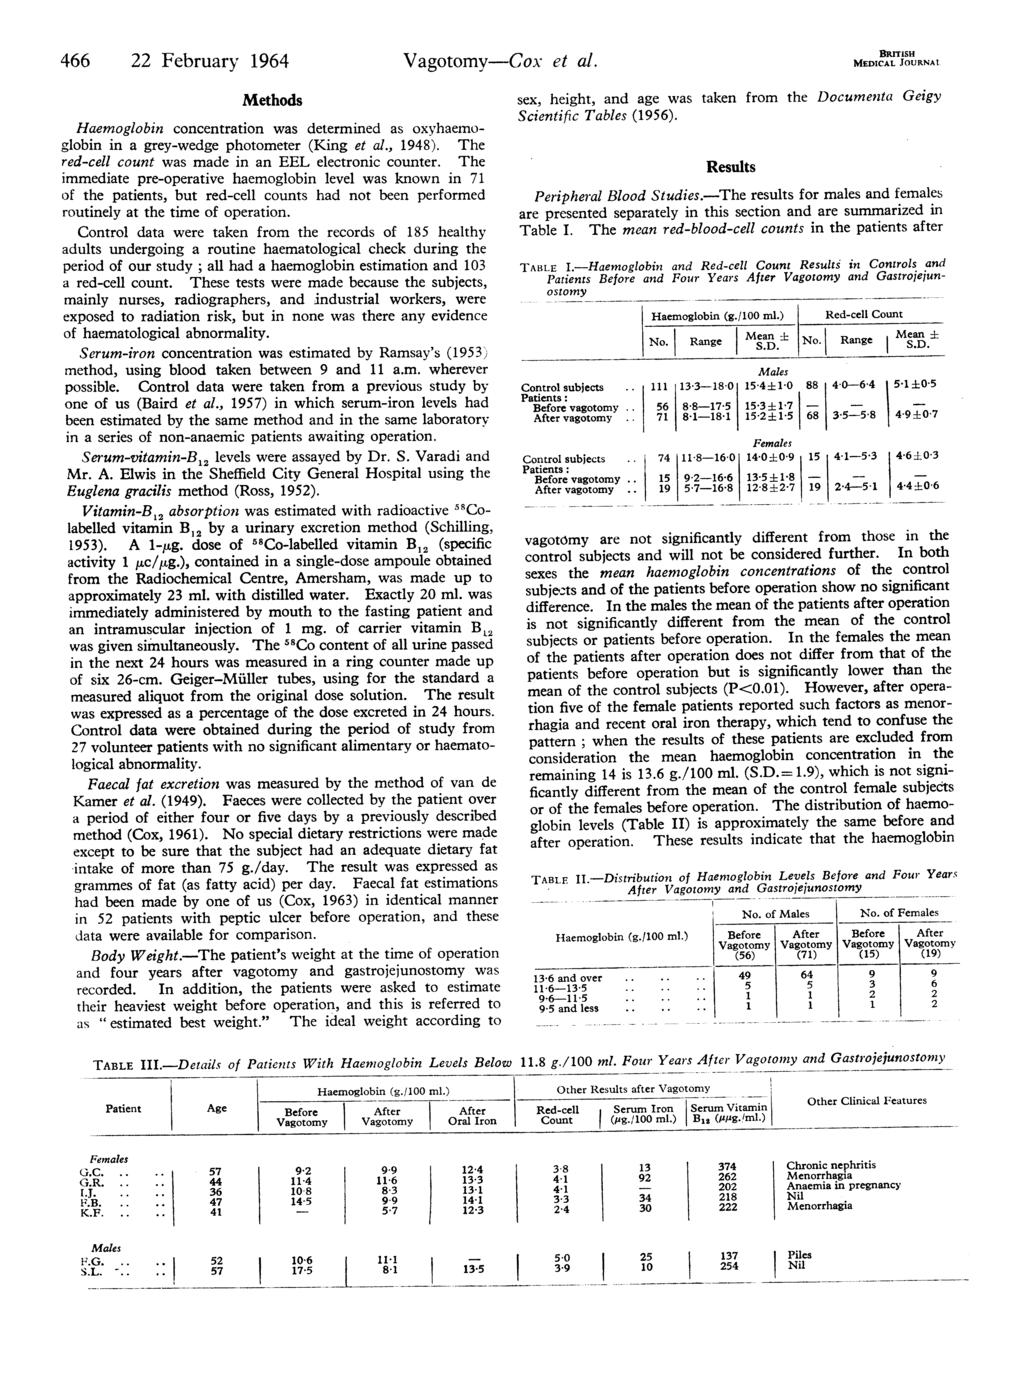 466 22 Februry 1964 Methods Hemoglobin concentrtion ws determined s oxyhemoglobin in grey-wedge photometer (King et l., 1948). The red-cell count ws mde in n EEL electronic counter.